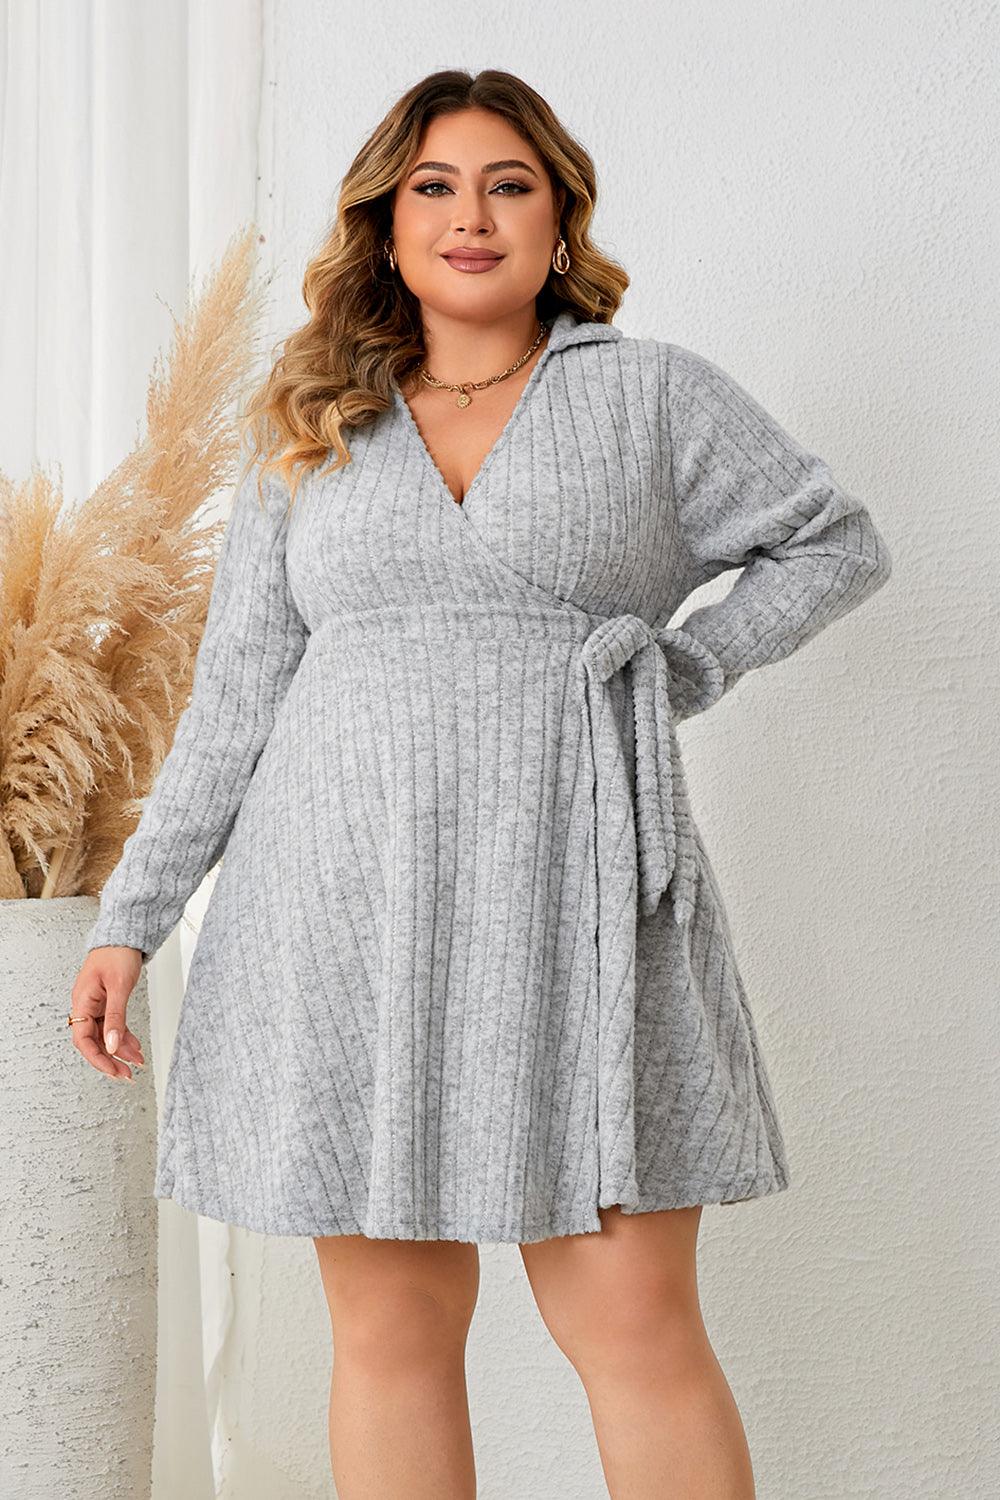 Plus Size Collared Neck Long Sleeve Tied Dress - CADEAUME